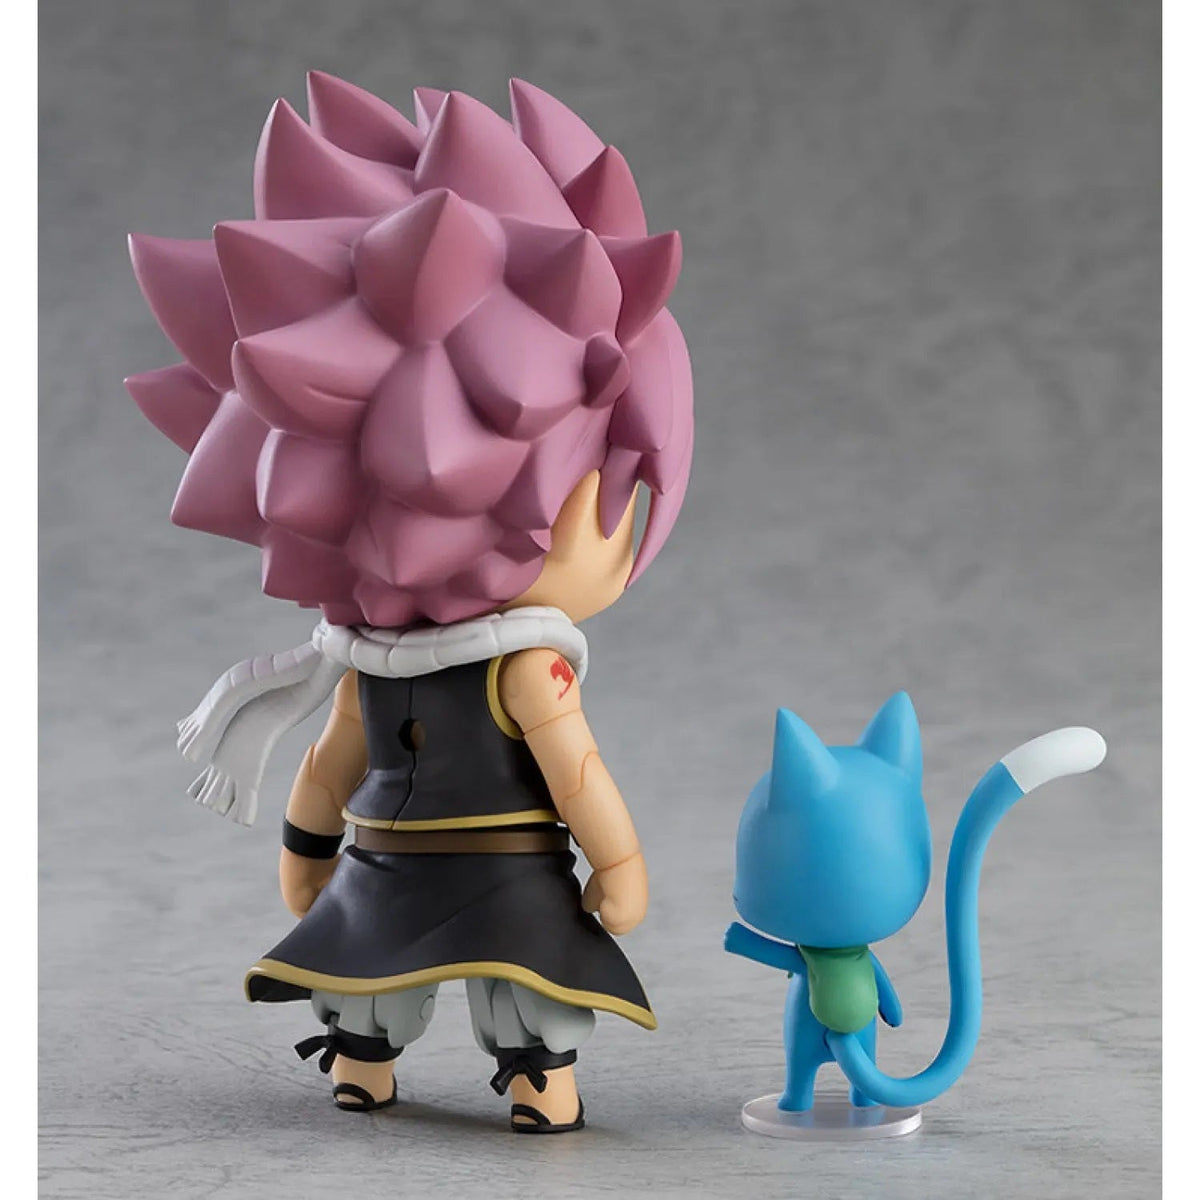 Fairy Tail Final Season Nendoroid [1741] &quot;Natsu Dragneel&quot;-Max Factory-Ace Cards &amp; Collectibles